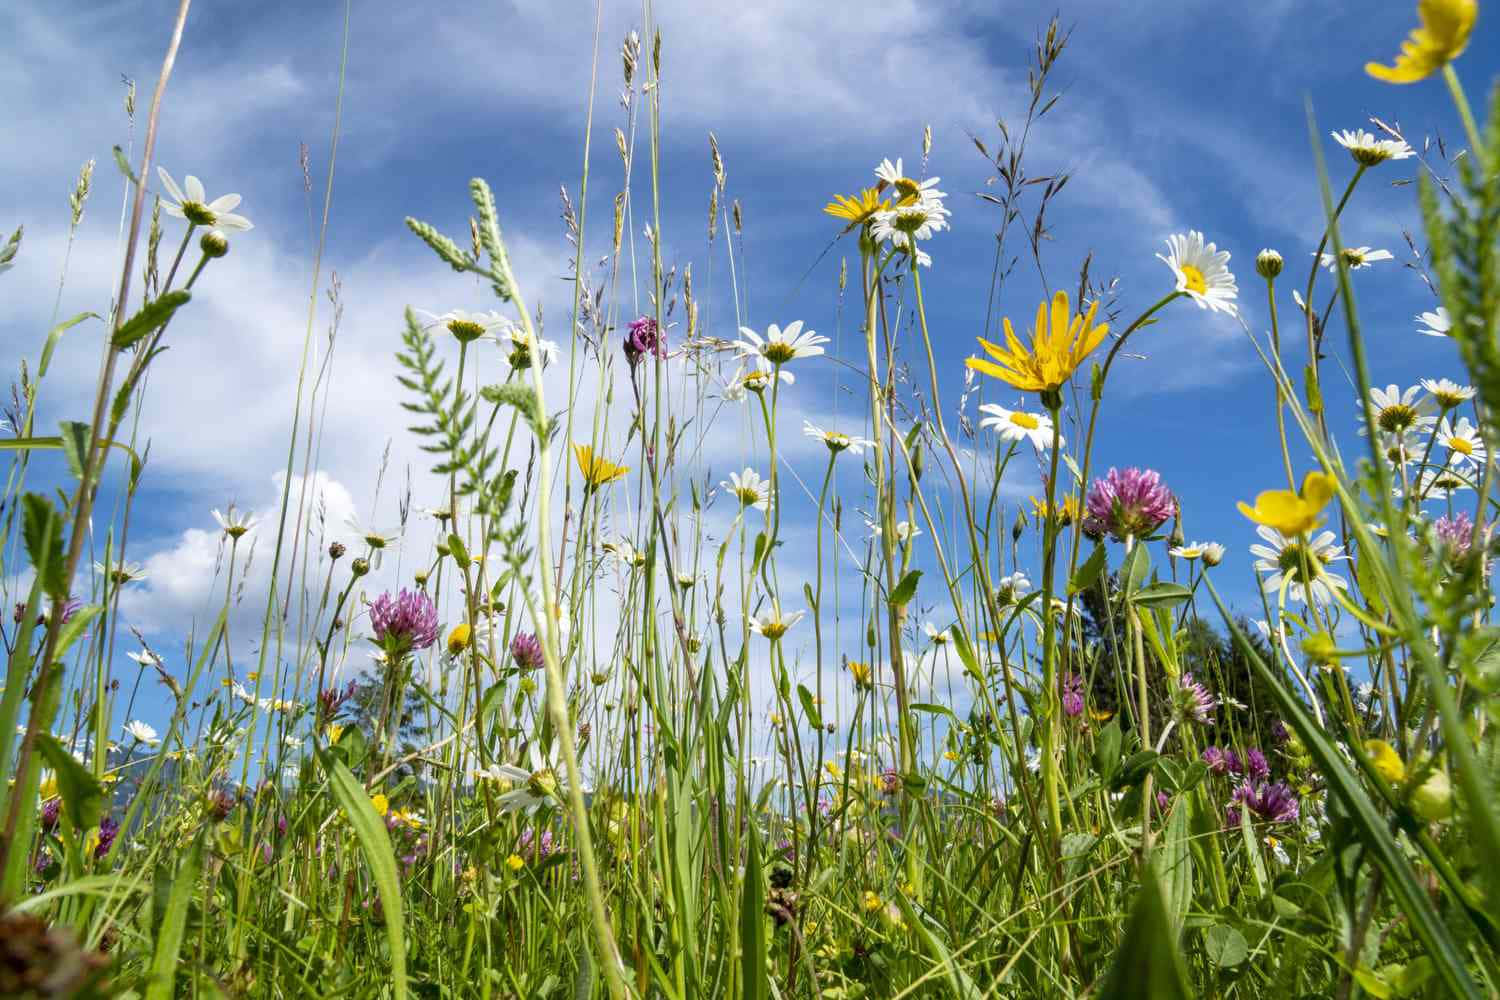 Captivating Wildflowers Flourishing in the Meadow Wallpaper